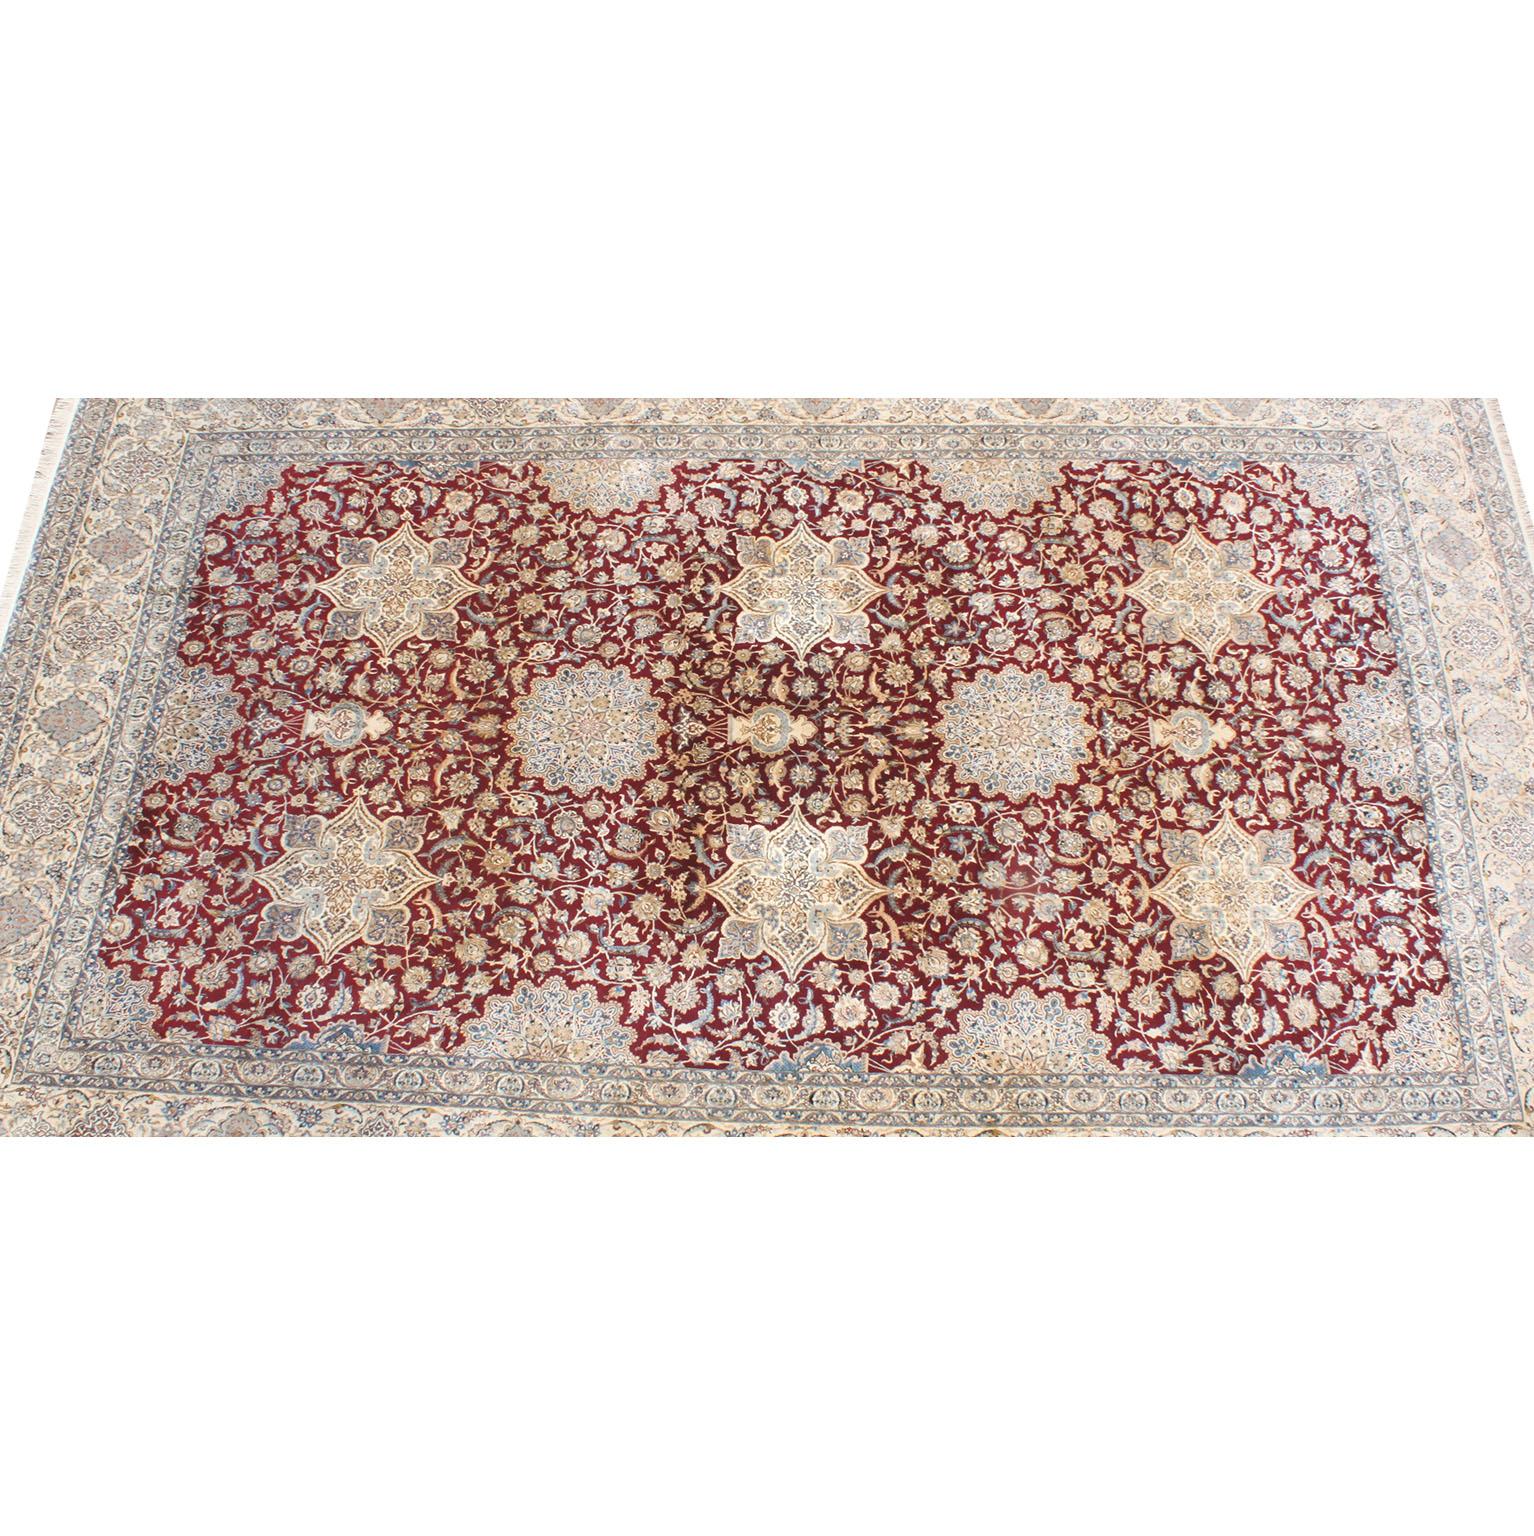 A Palatial Persian Nain hand-knotted wool and silk Pile area rug. The very large and impressive vibrant and colorful medallion carpet with red-burgundy, ivory-beige, blue-Celeste and gold floral designs in a middle eastern flavor. Circa: Mid to